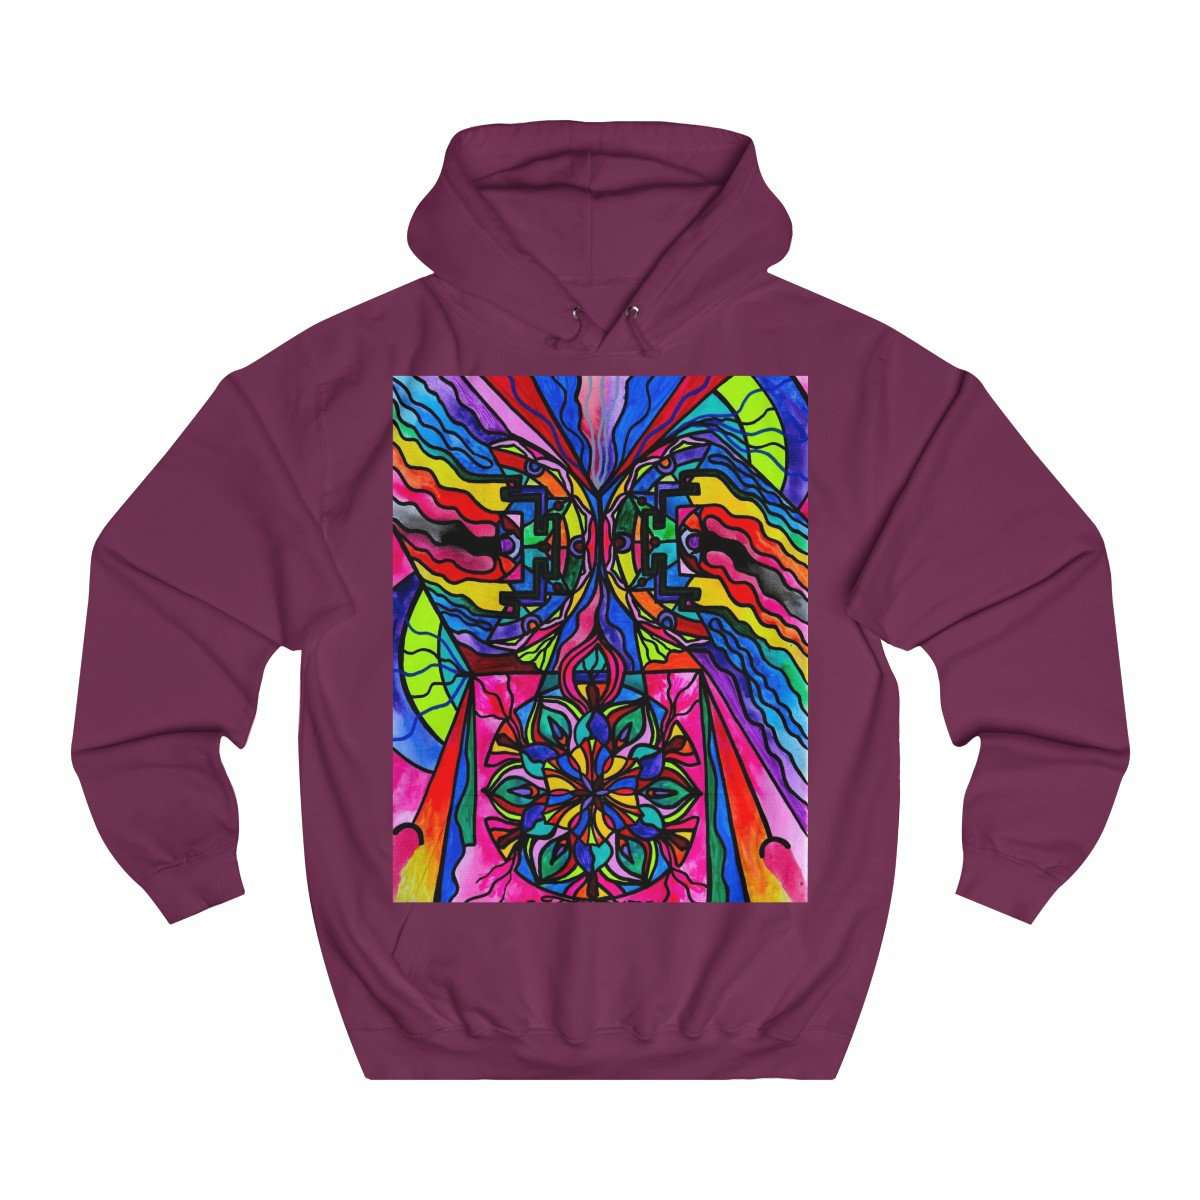 shop-for-non-attachment-unisex-college-hoodie-hot-on-sale_13.jpg